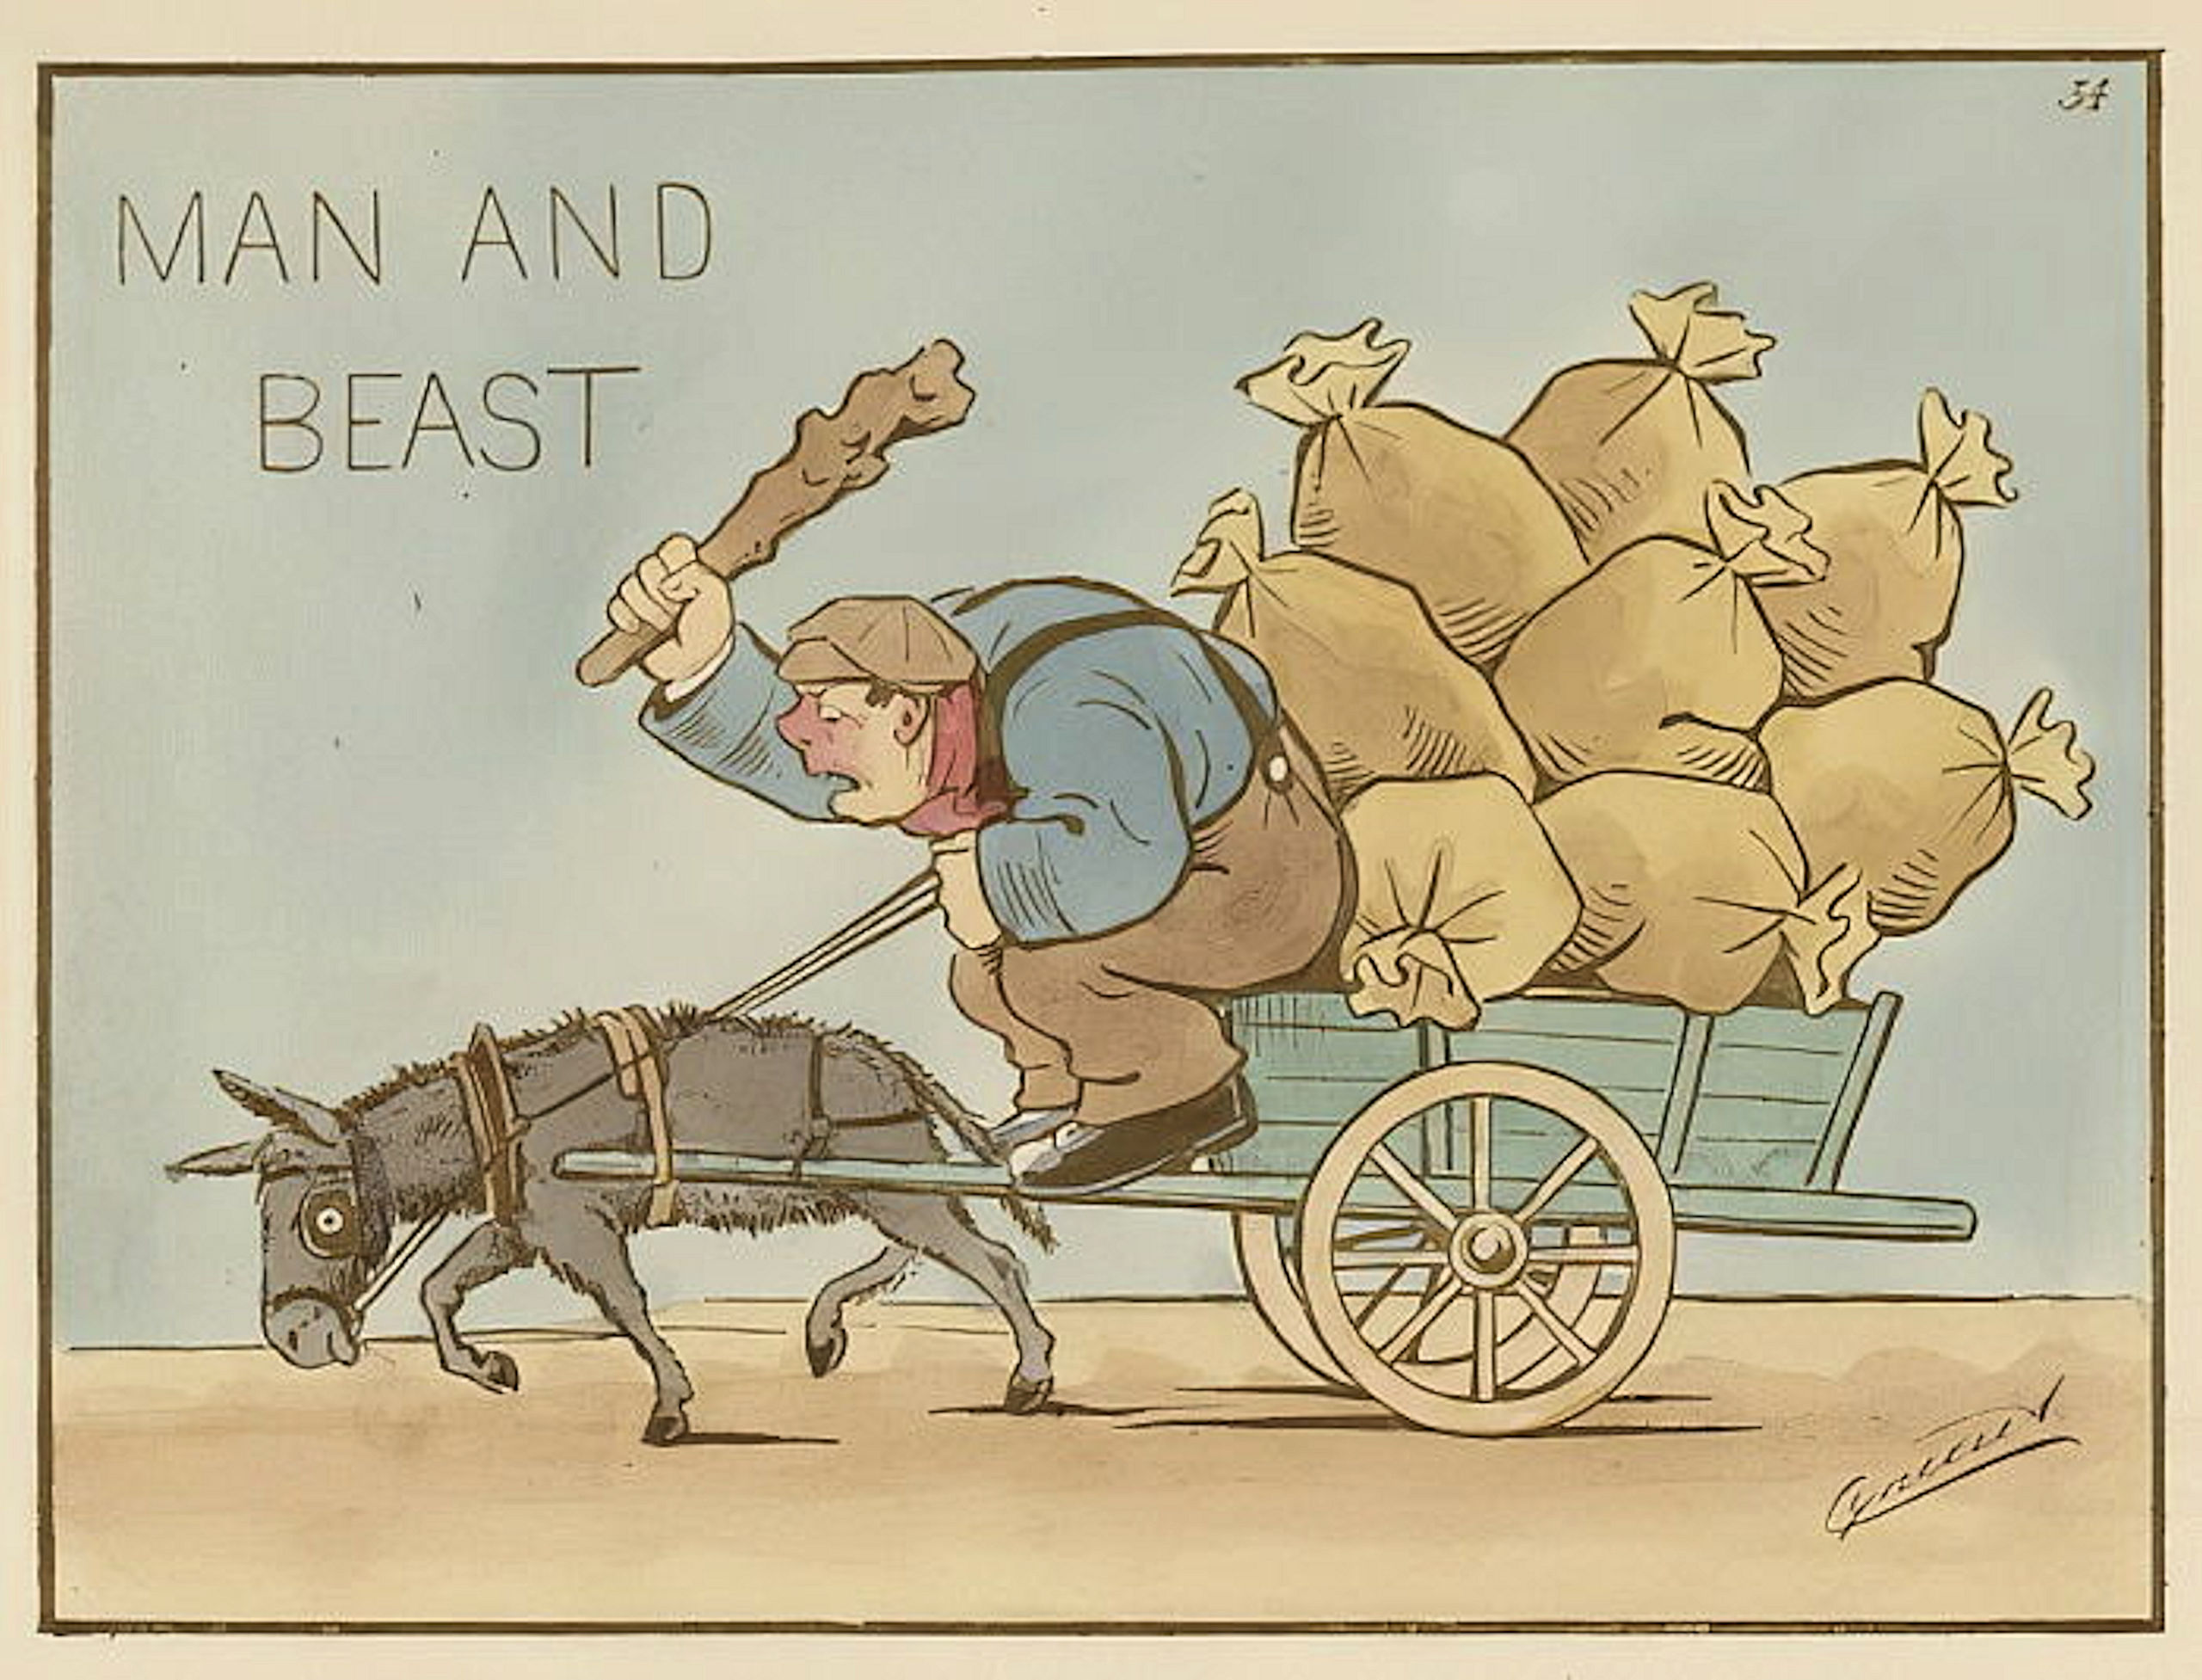 Tayport Heritage Trail - Board 6 - Cynicus postcard example - "Man and Beast"